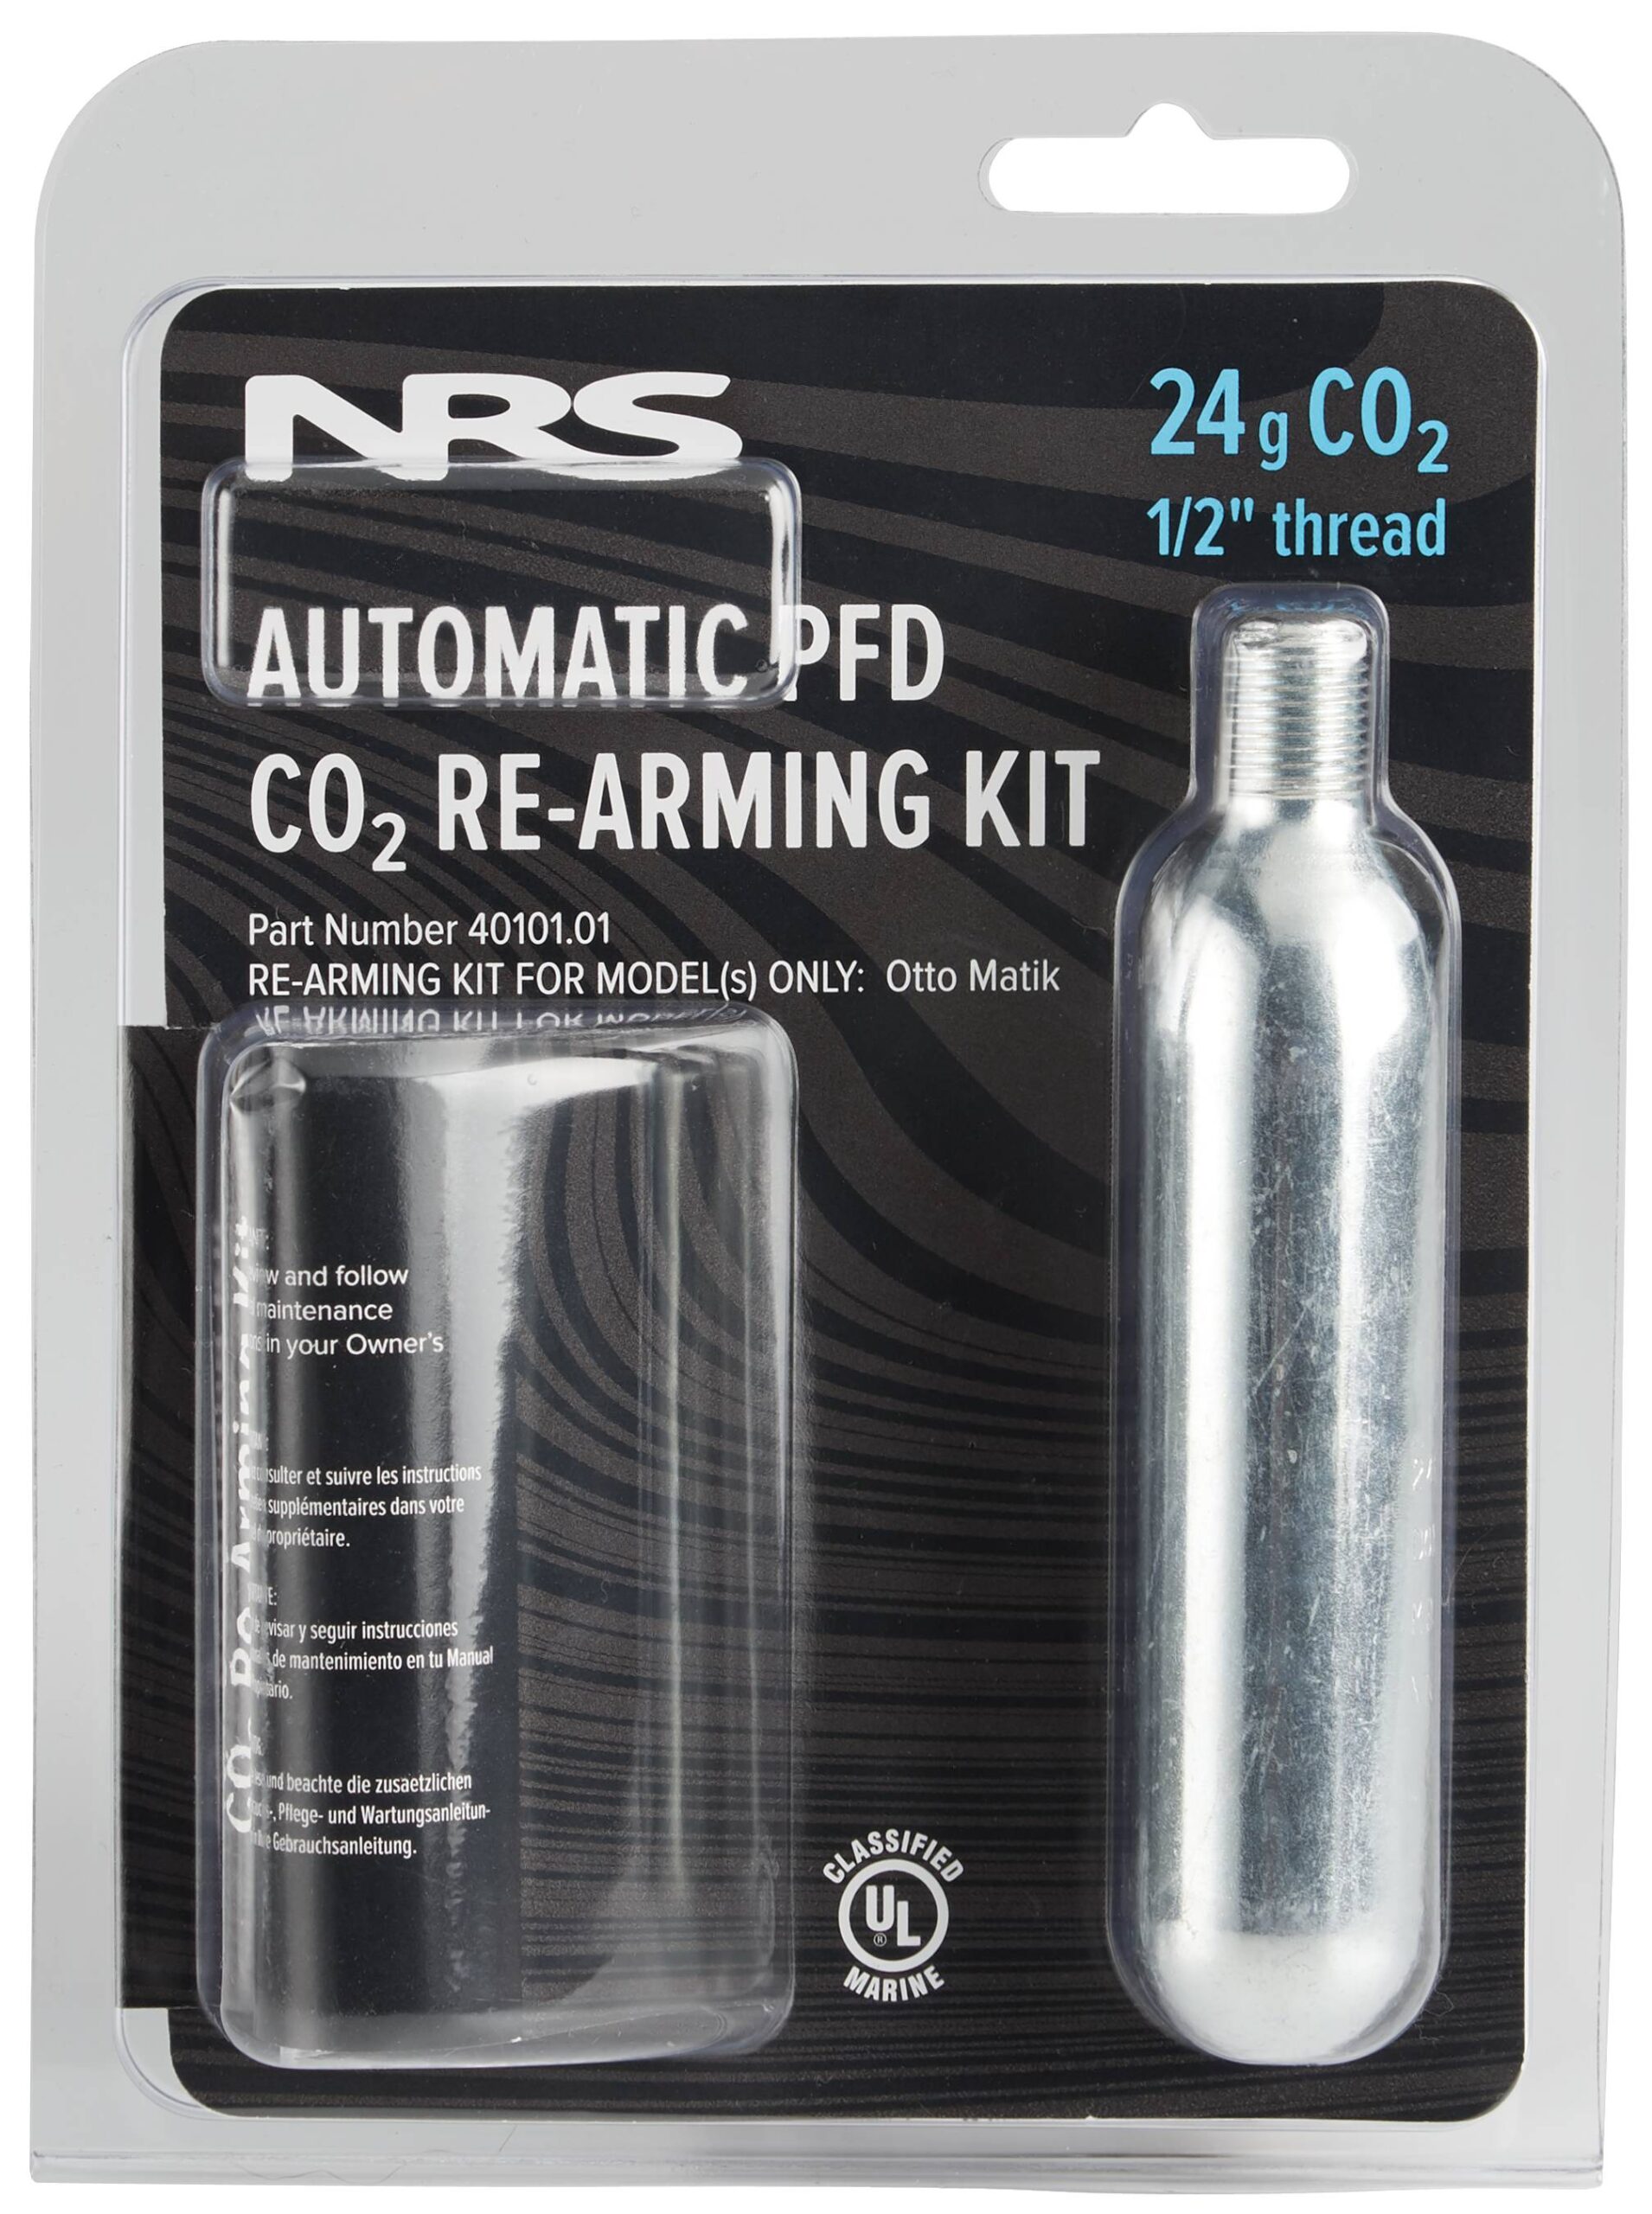 NRS CO-2 Re Arming Kit 24g 12" Threads